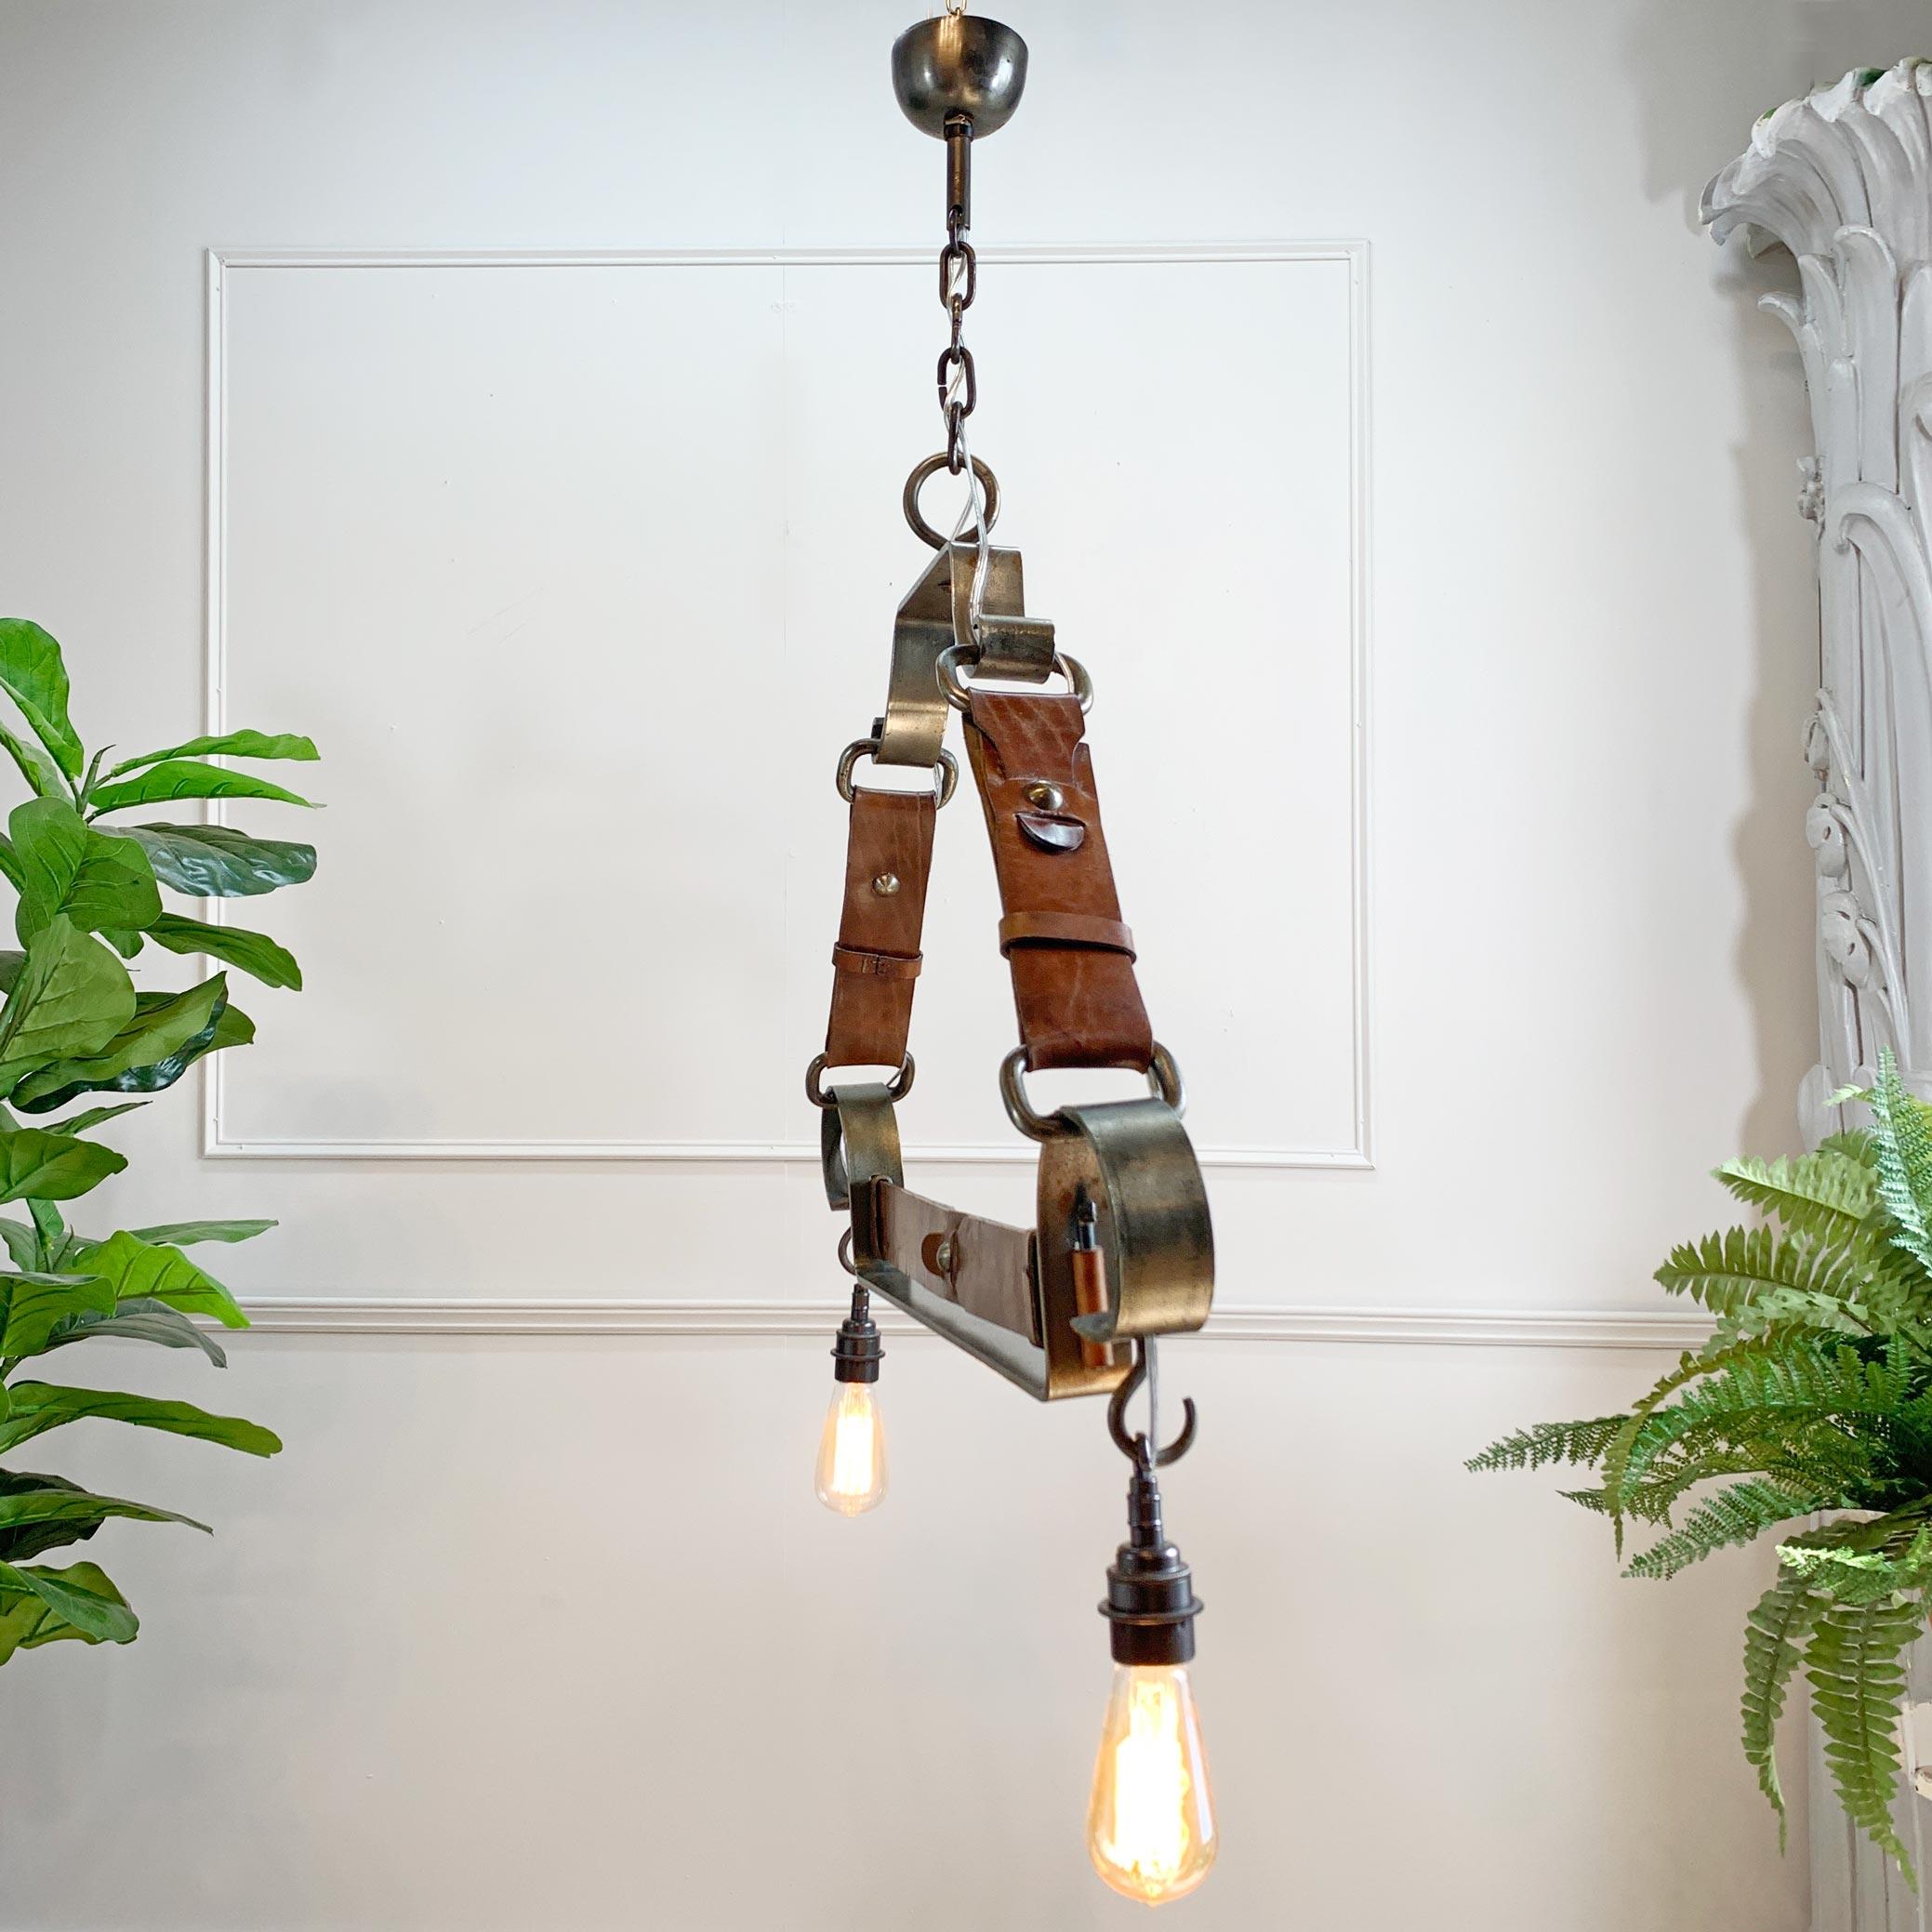 Brutalist Jean-Pierre Ryckaert Tan Leather Strap and Steel Ceiling Pendant Light For Sale